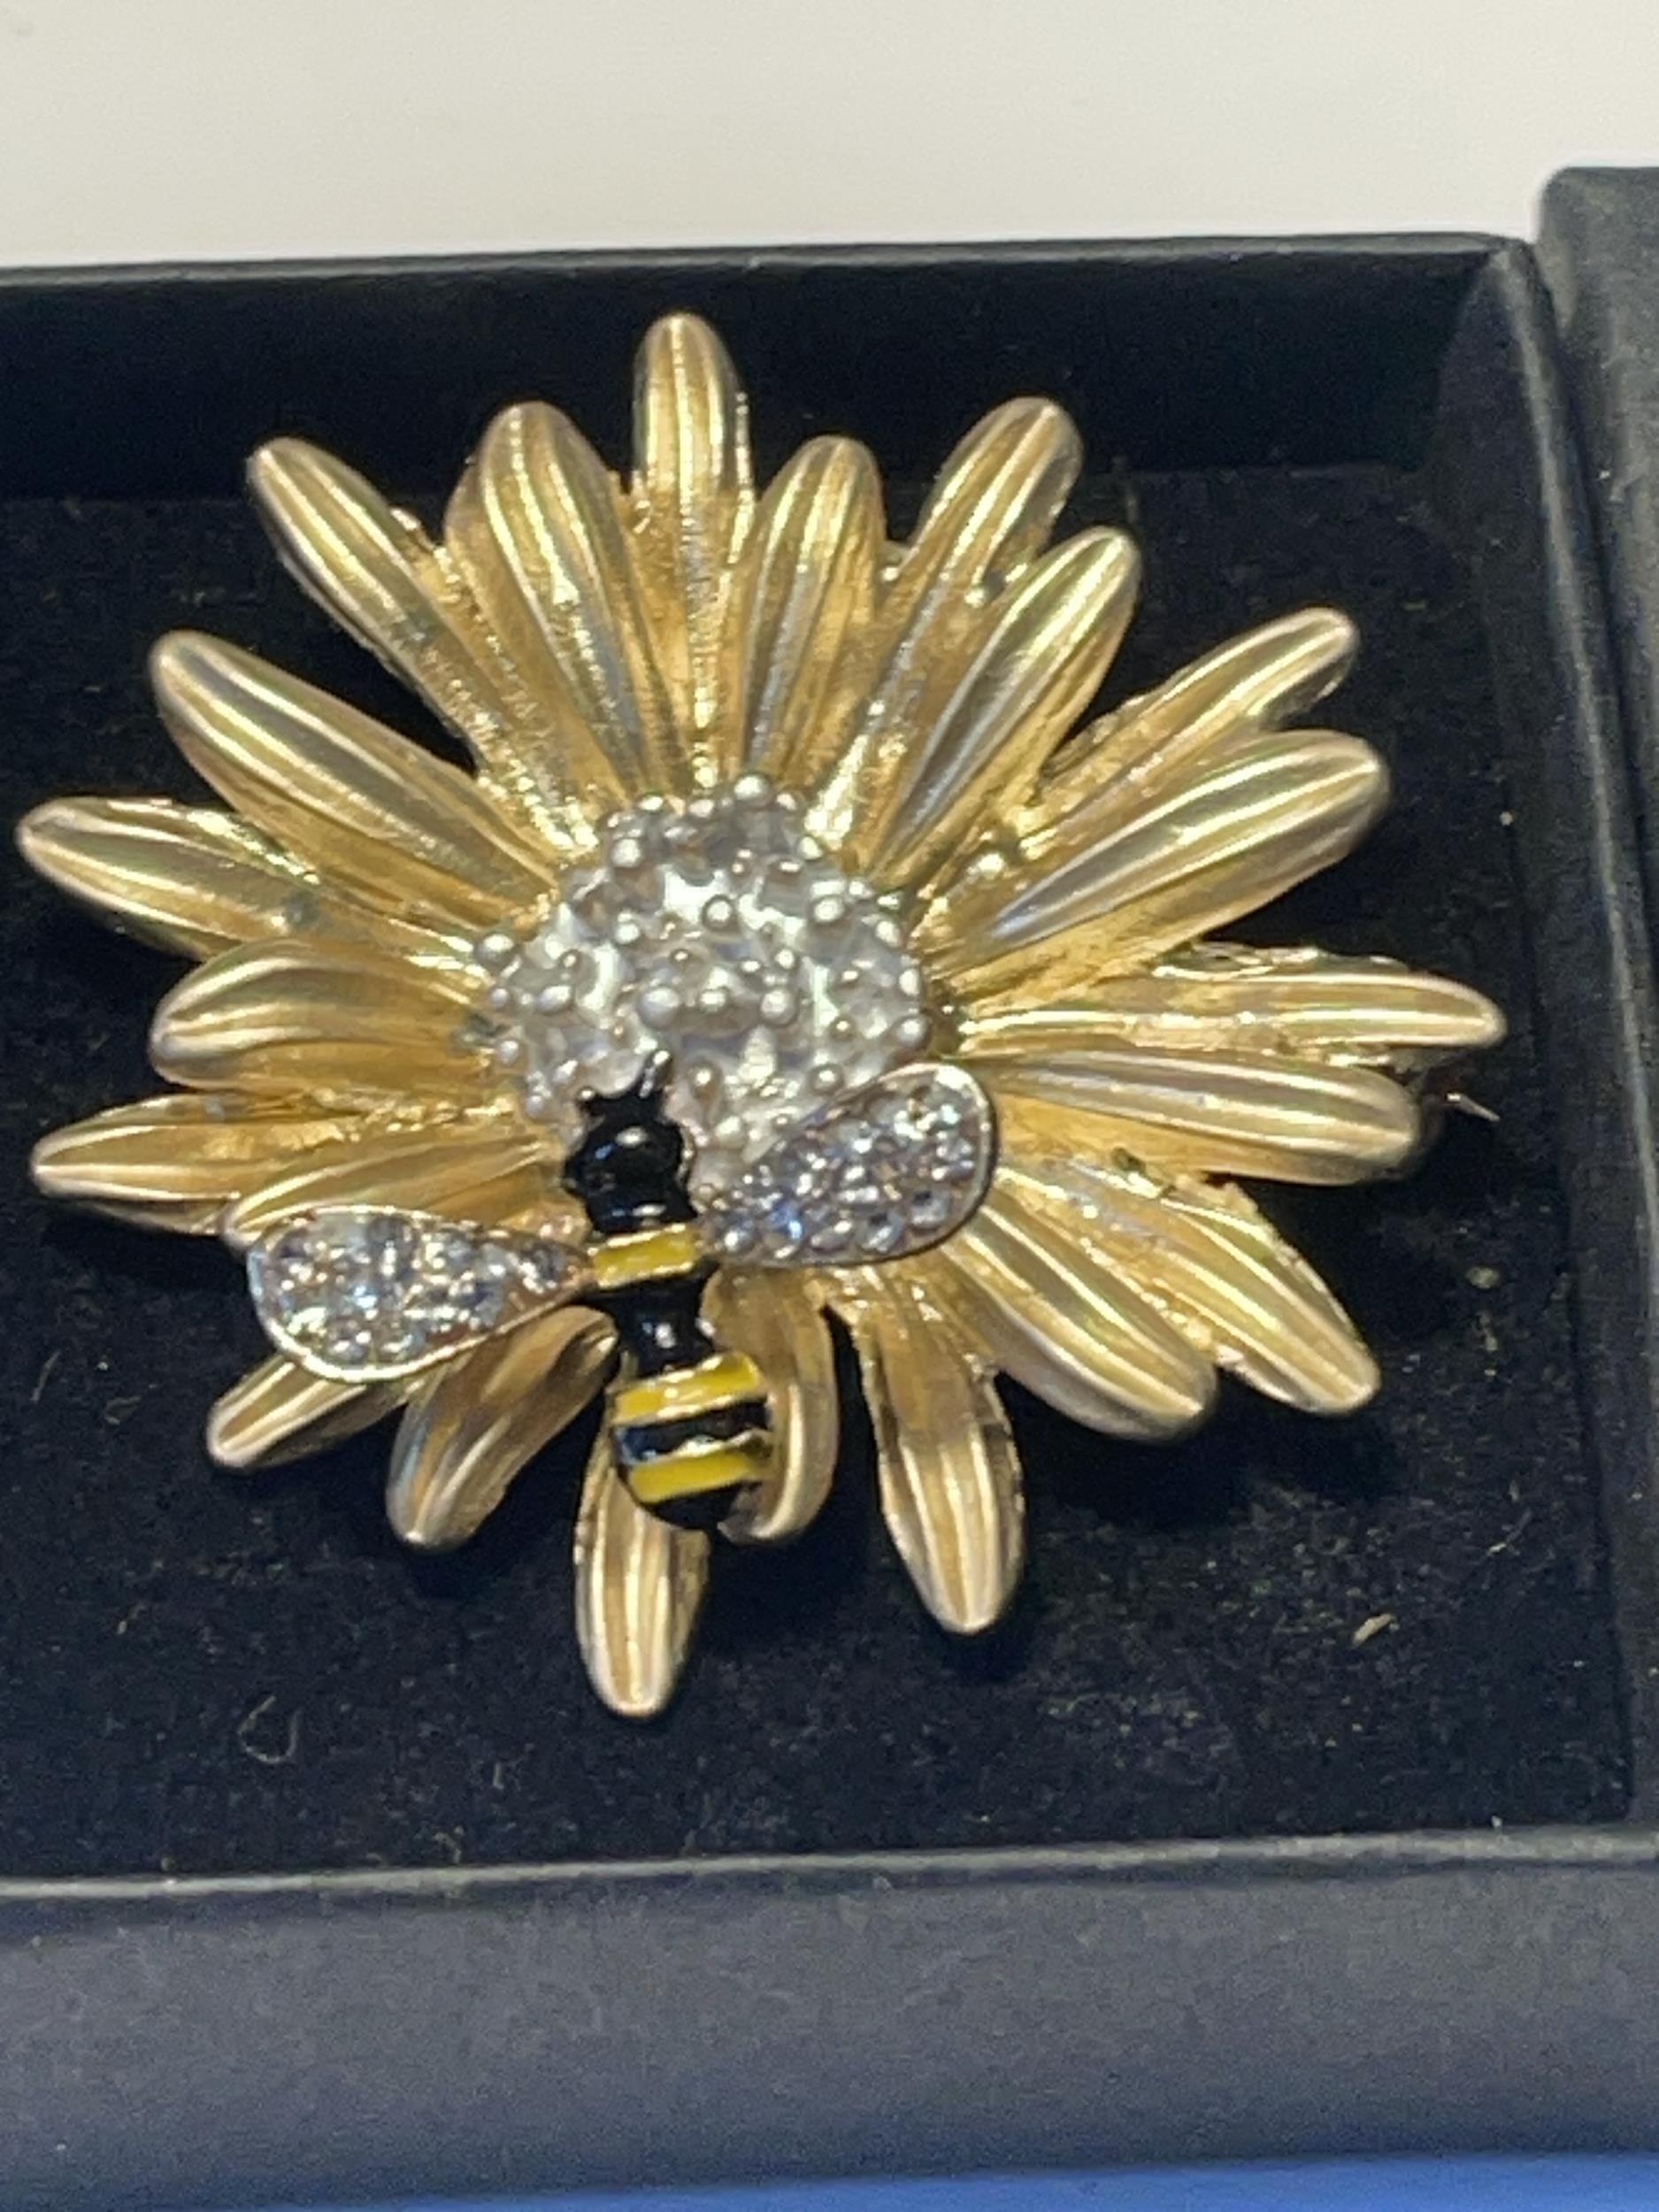 A MANCHESTER BEE BROOCH FROM THE MANCHESTER SHOP IN A PRESENTATION BOX - Image 2 of 4